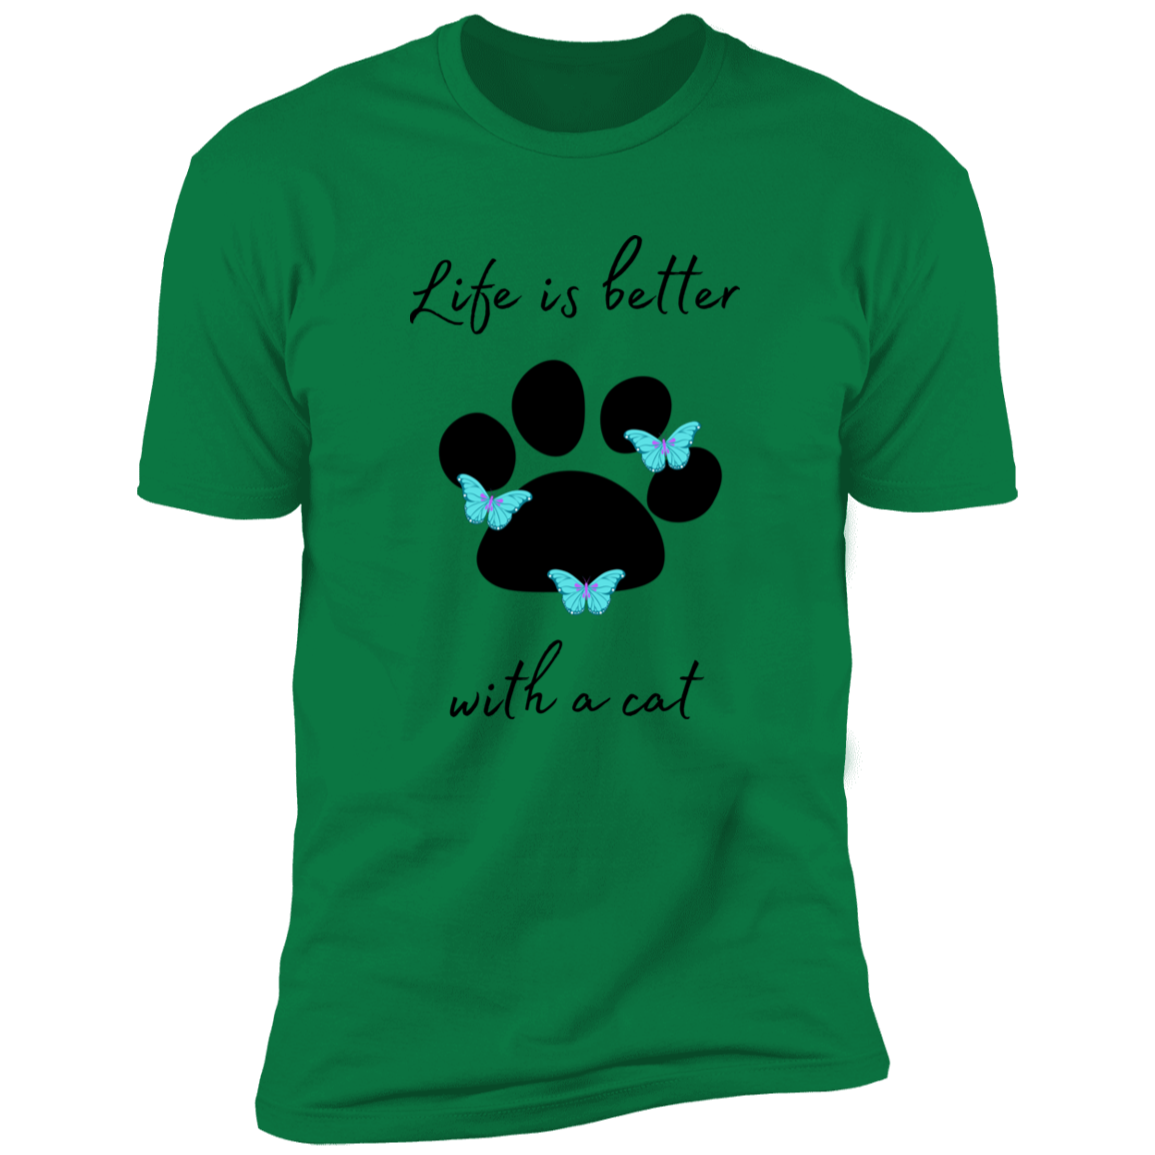 Life is Better with a Cat T-shirt, cat shirt for humans, Cat T-shirt in kelly green